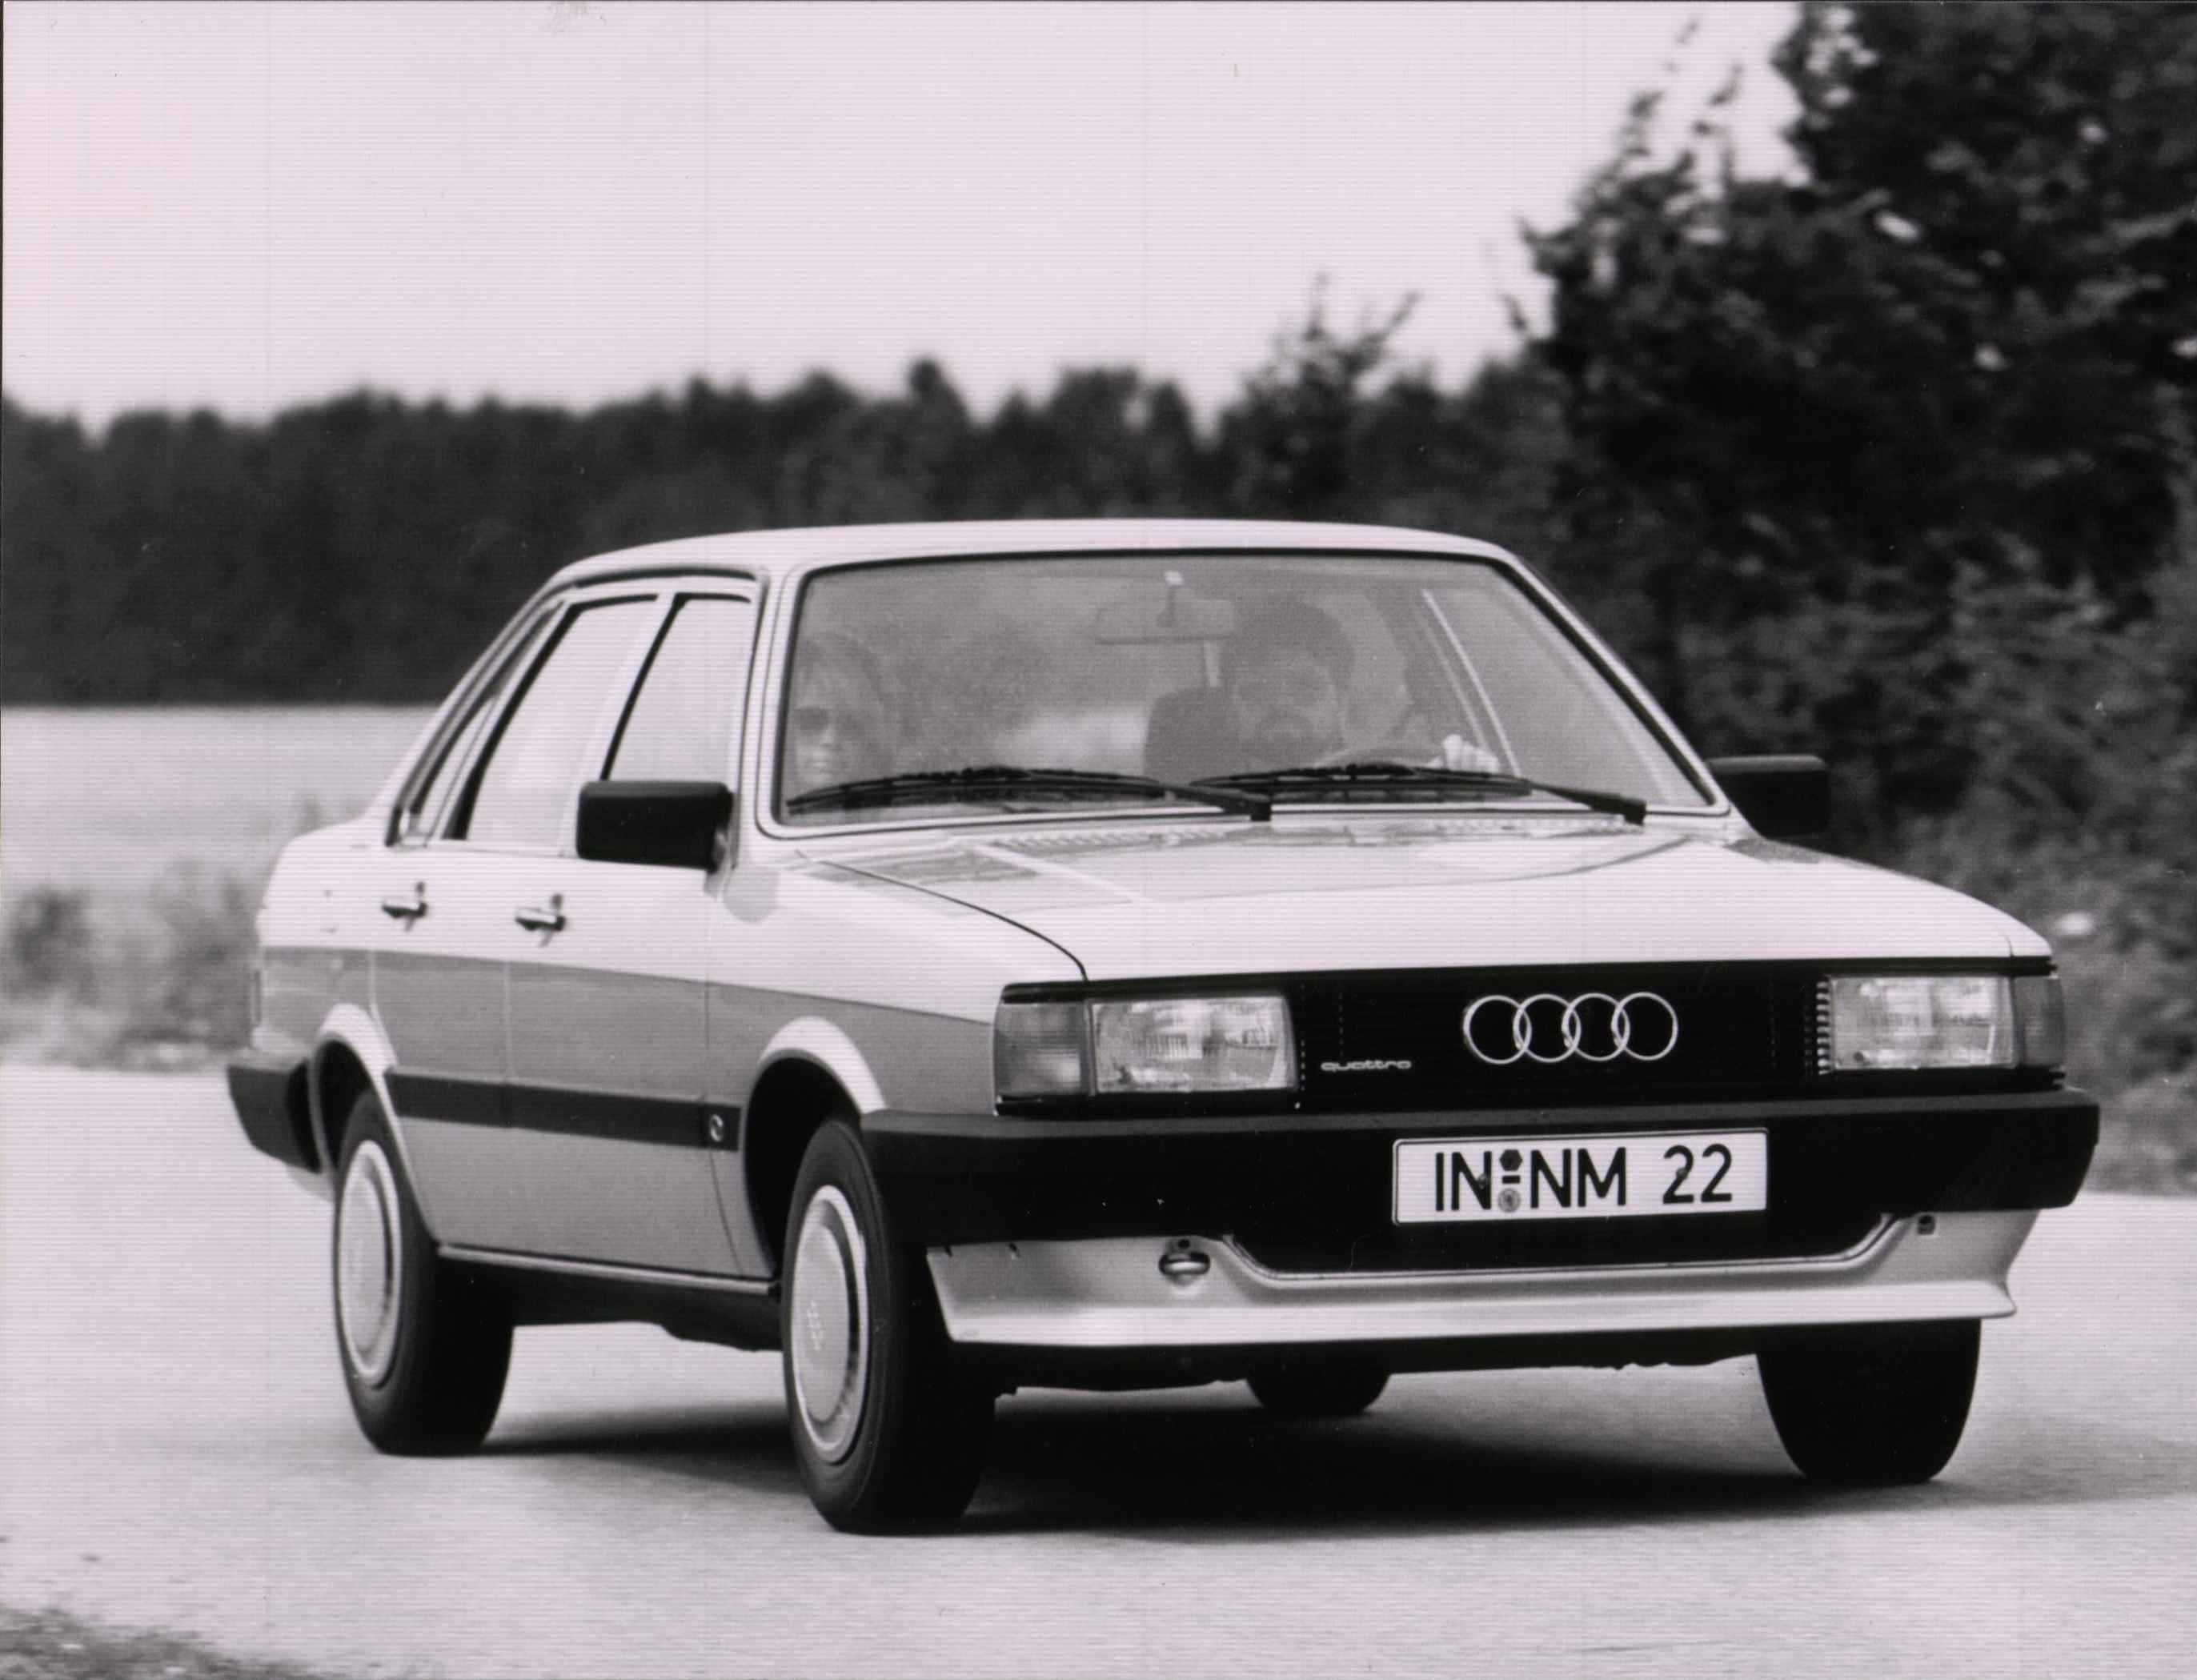 An Audi 80 and Audi 4000 are one and the same correct? - AudiWorld Forums